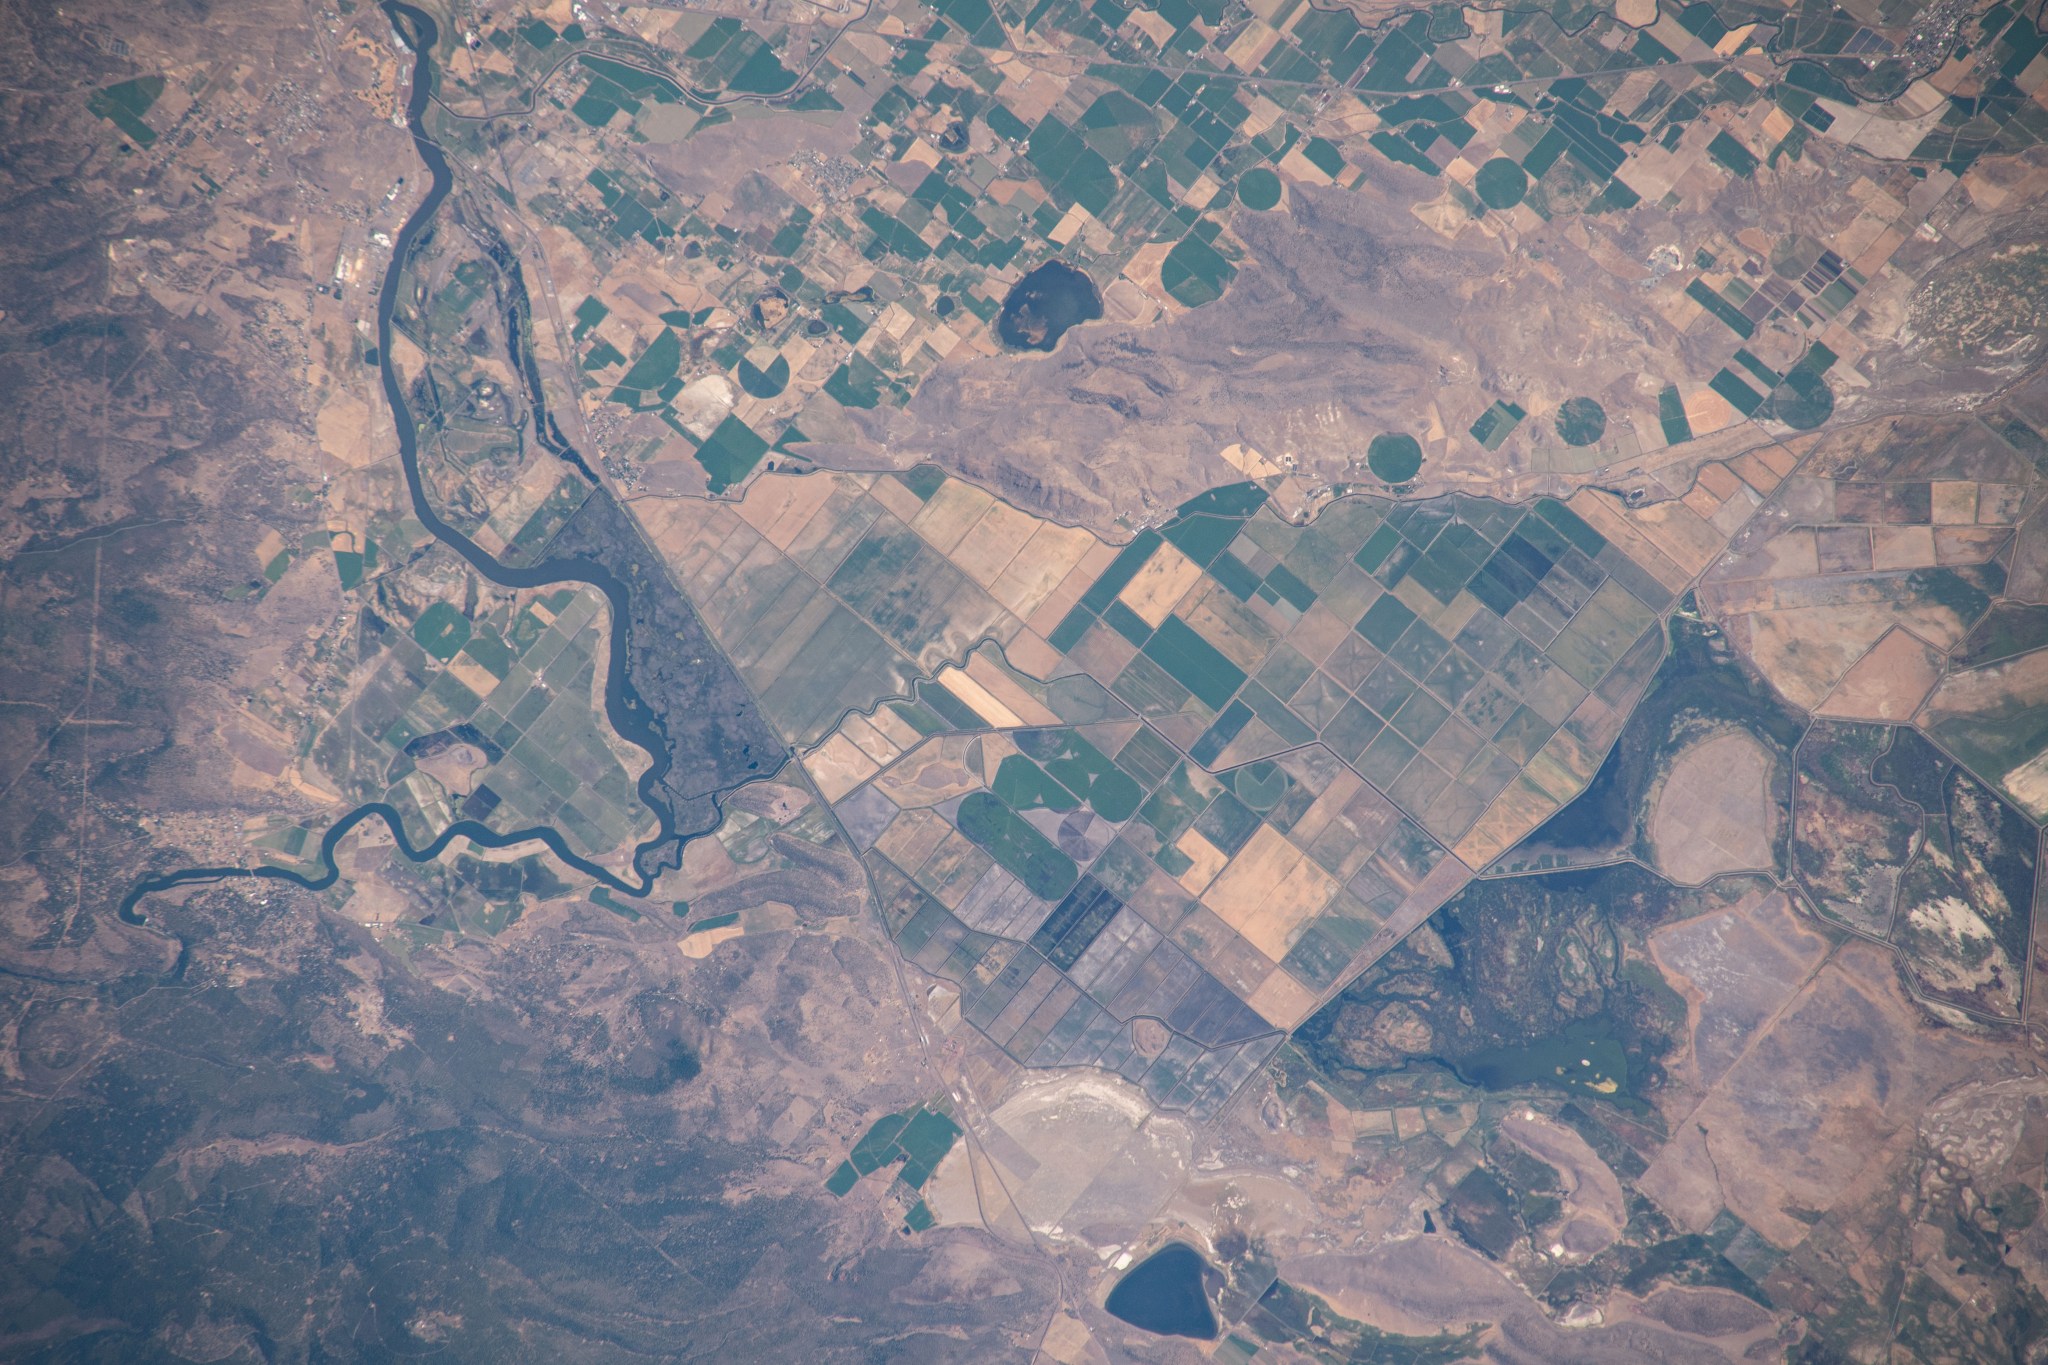 Klamath River, pictured from the International Space Station, runs through Oregon just north of the border with California.